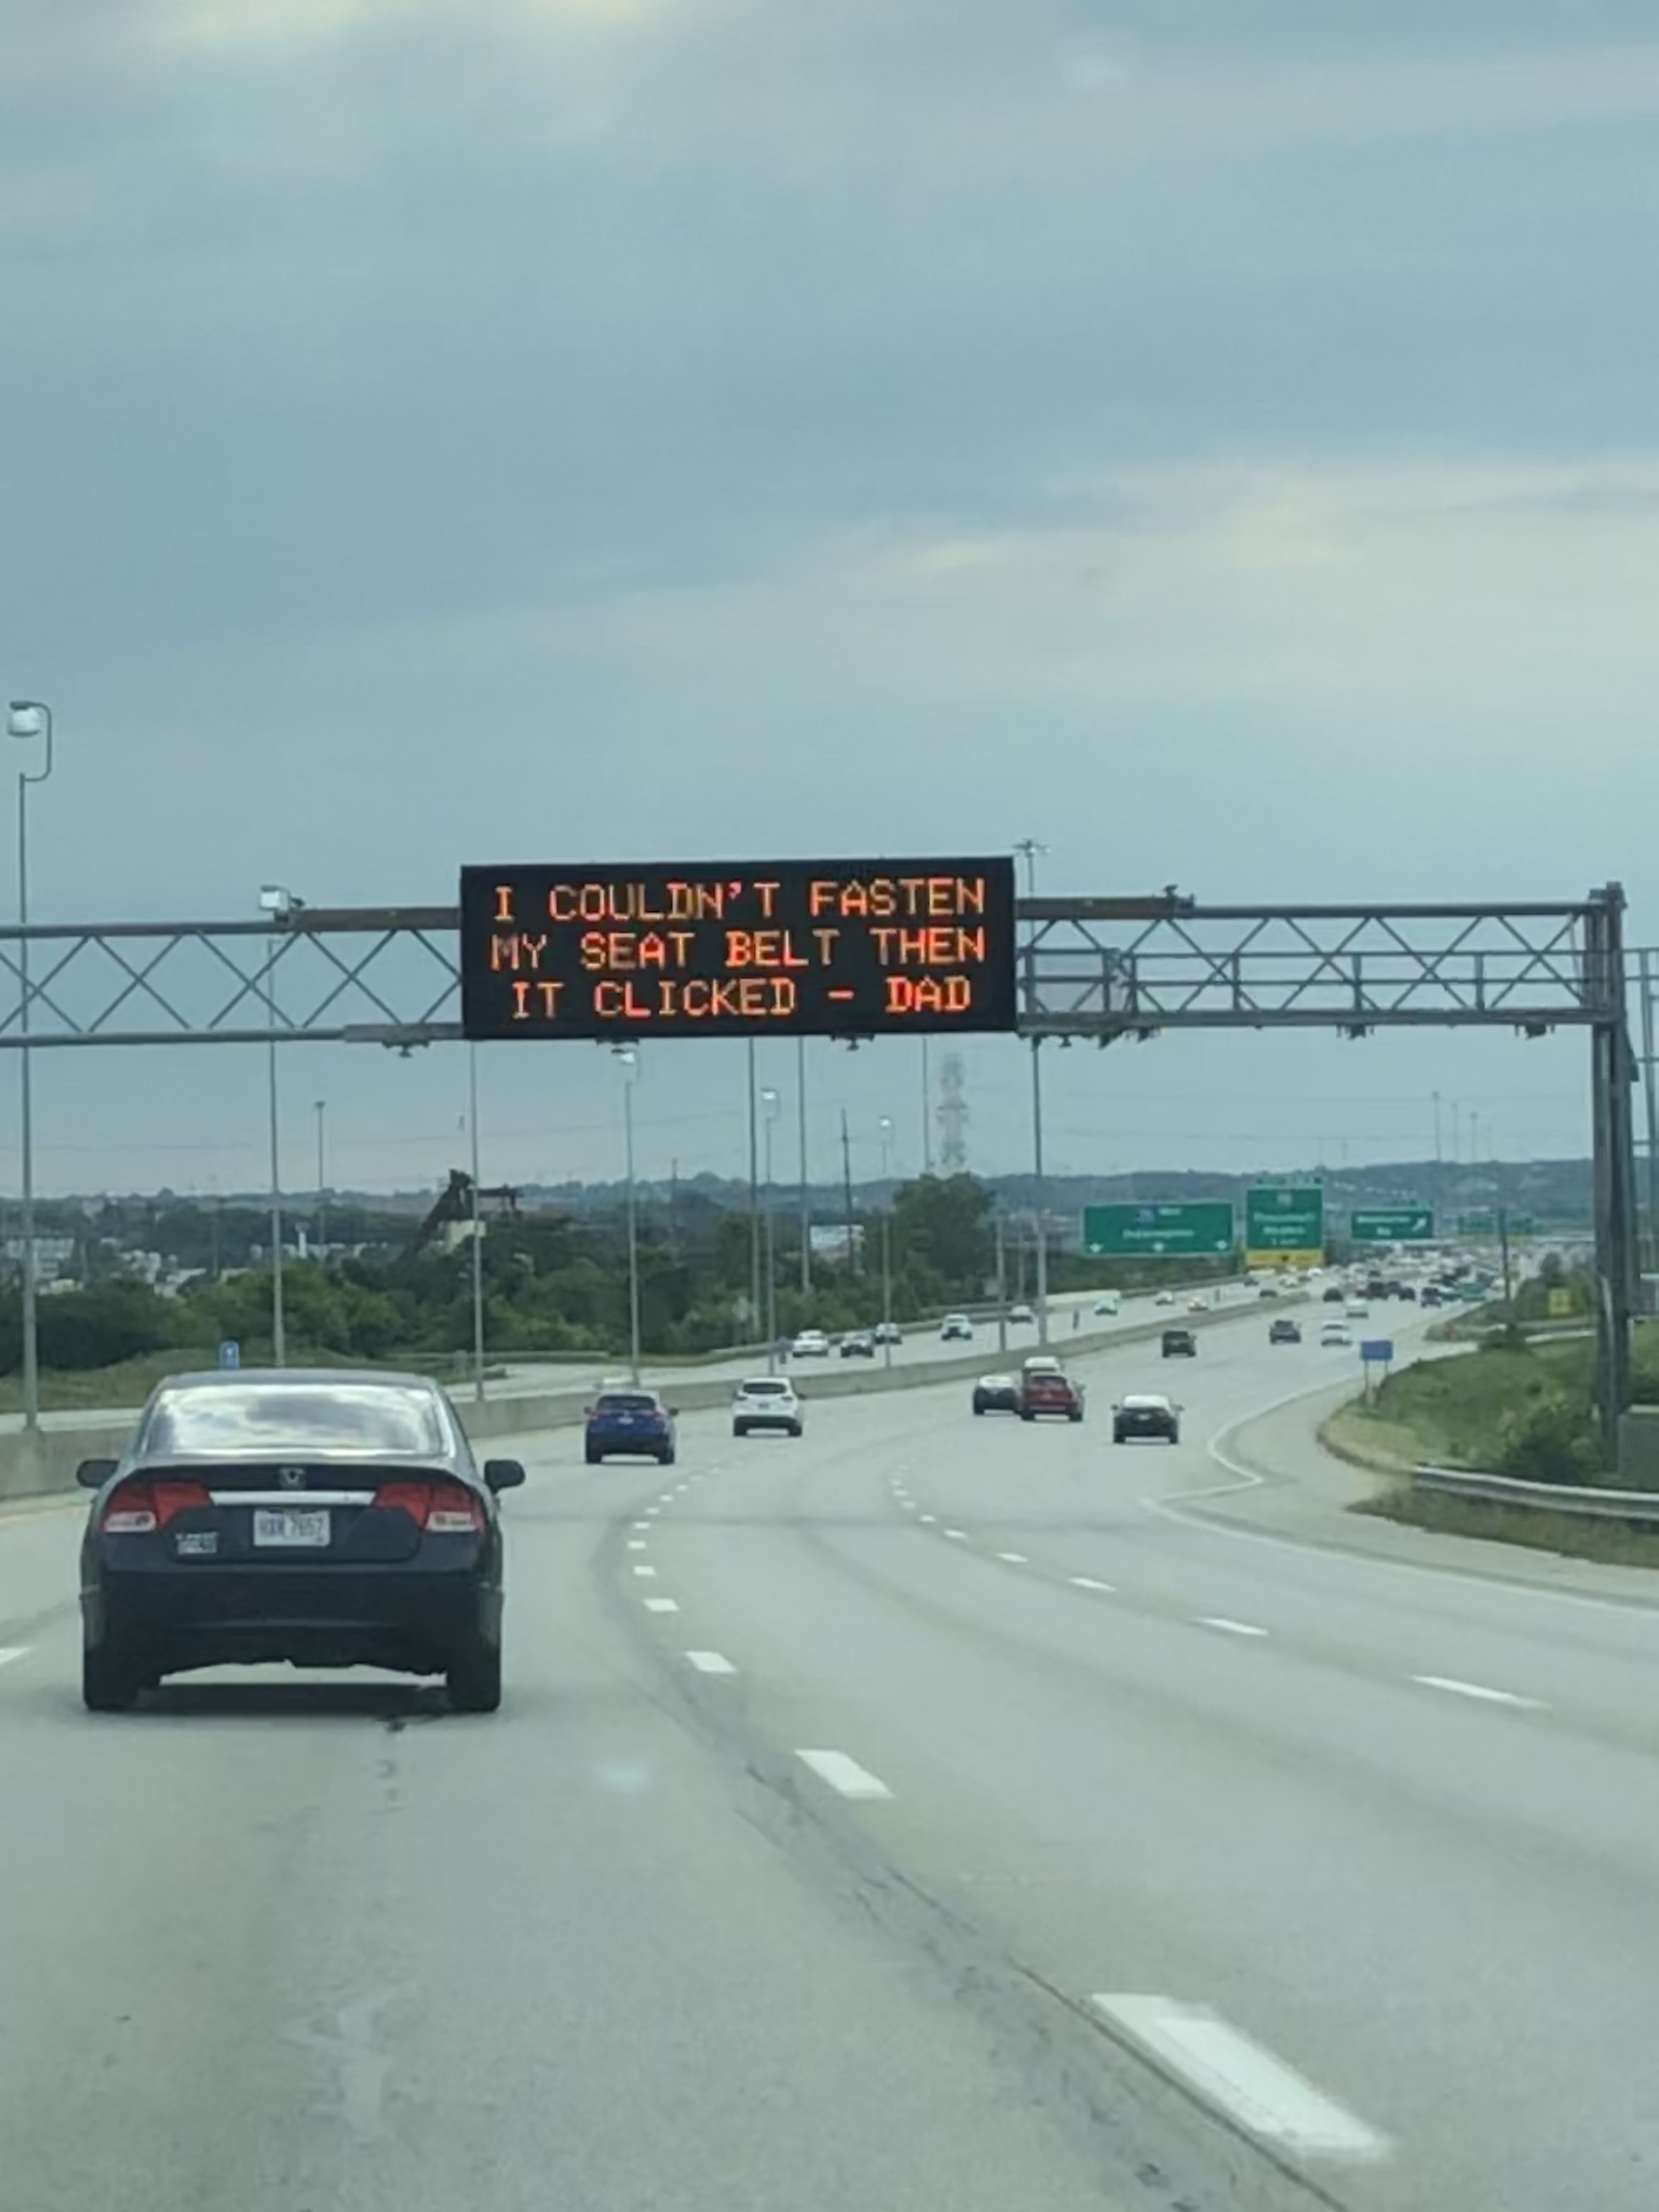 Ohio’s message sign reminding you to buckle up in a clever way. Happy Father’s Day!